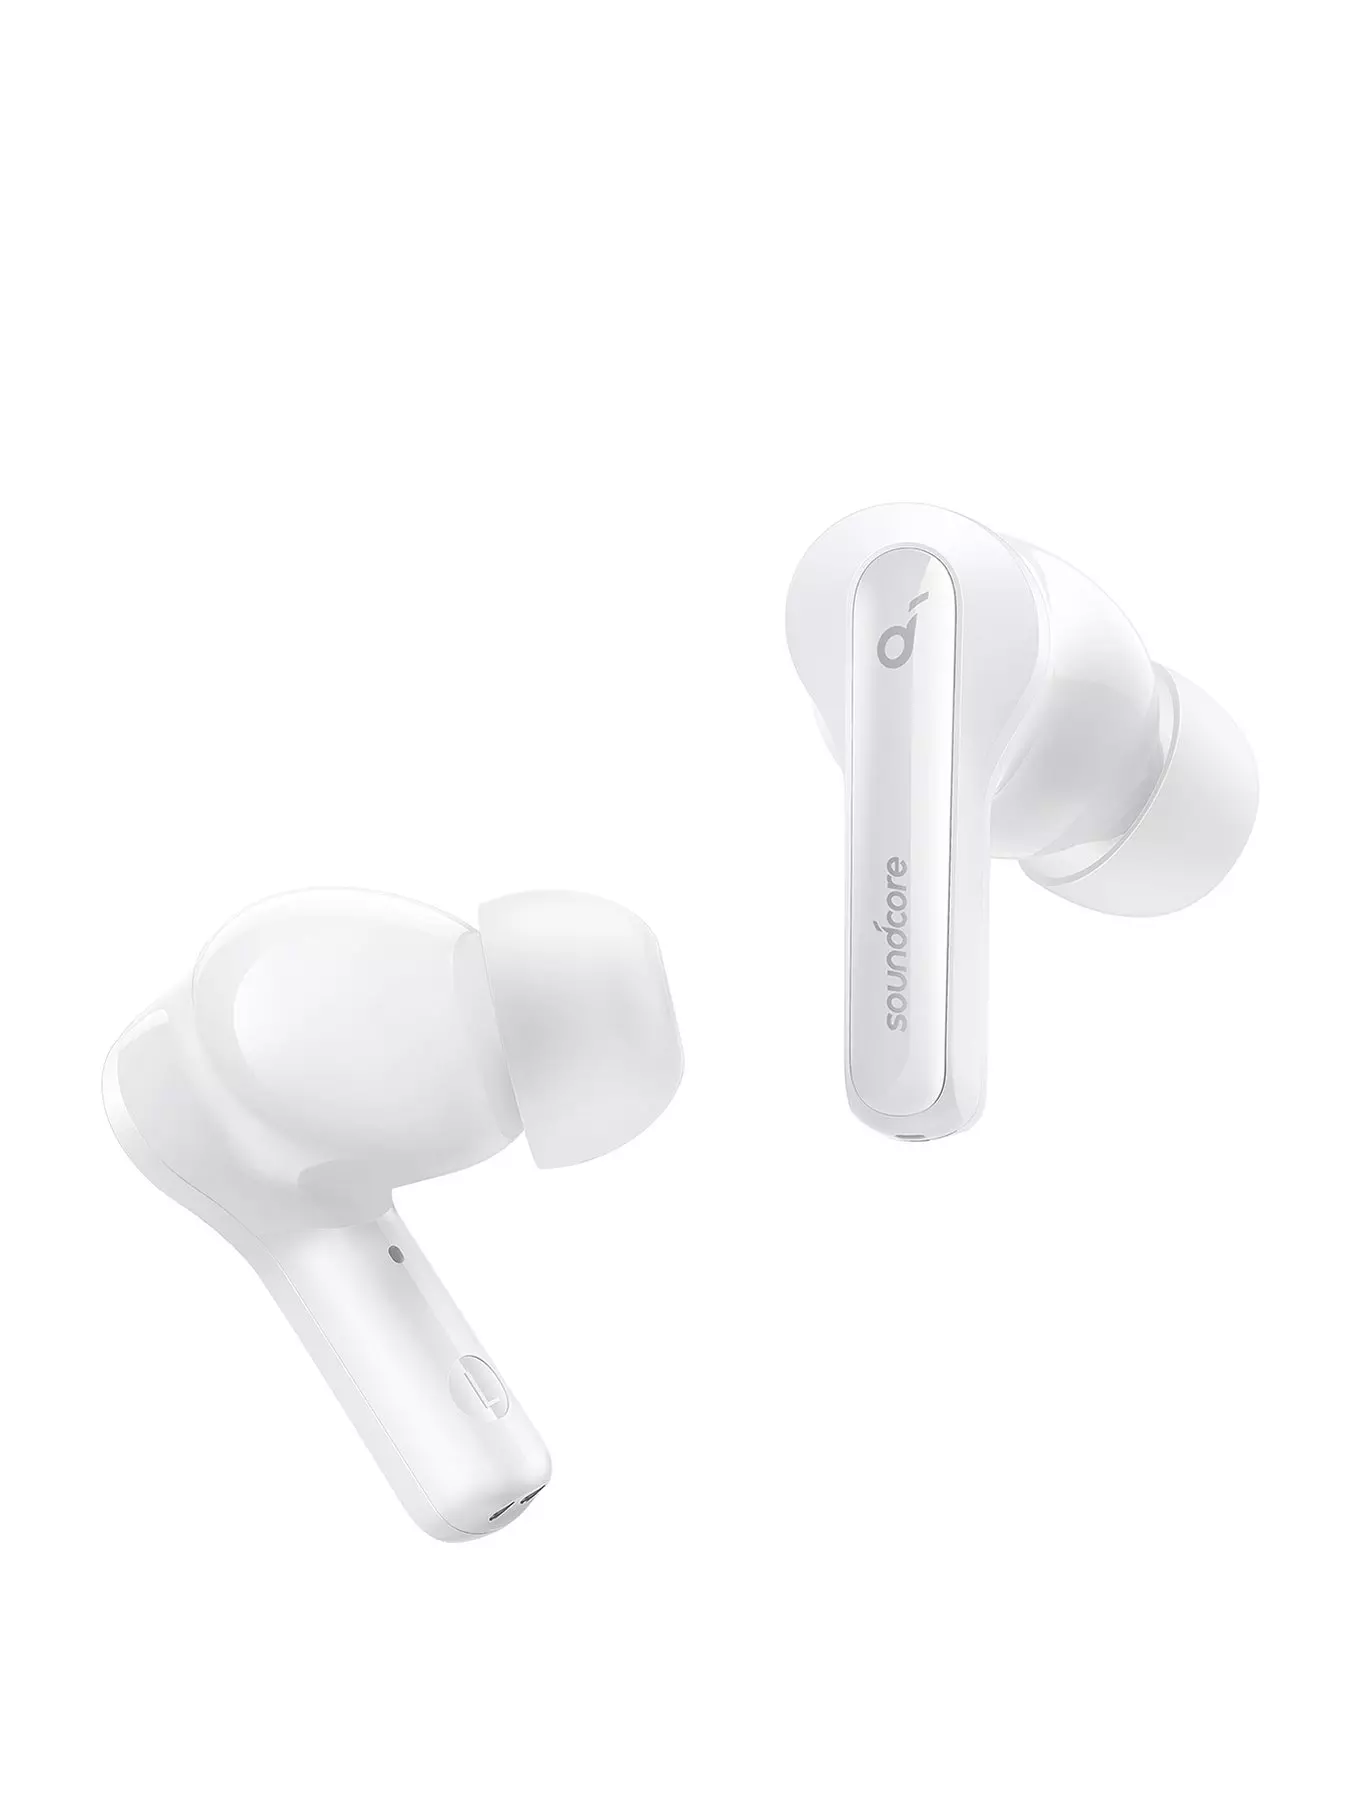  Nothing Ear 2 Hi-Res Wireless Earbuds, 2023 New Noise  Cancelling Headphones with Dual Chamber Design, Bluetooth Earbuds for  iPhone, Android, 4.5g Ultra Light, 36Hrs Playtime, White : Electronics